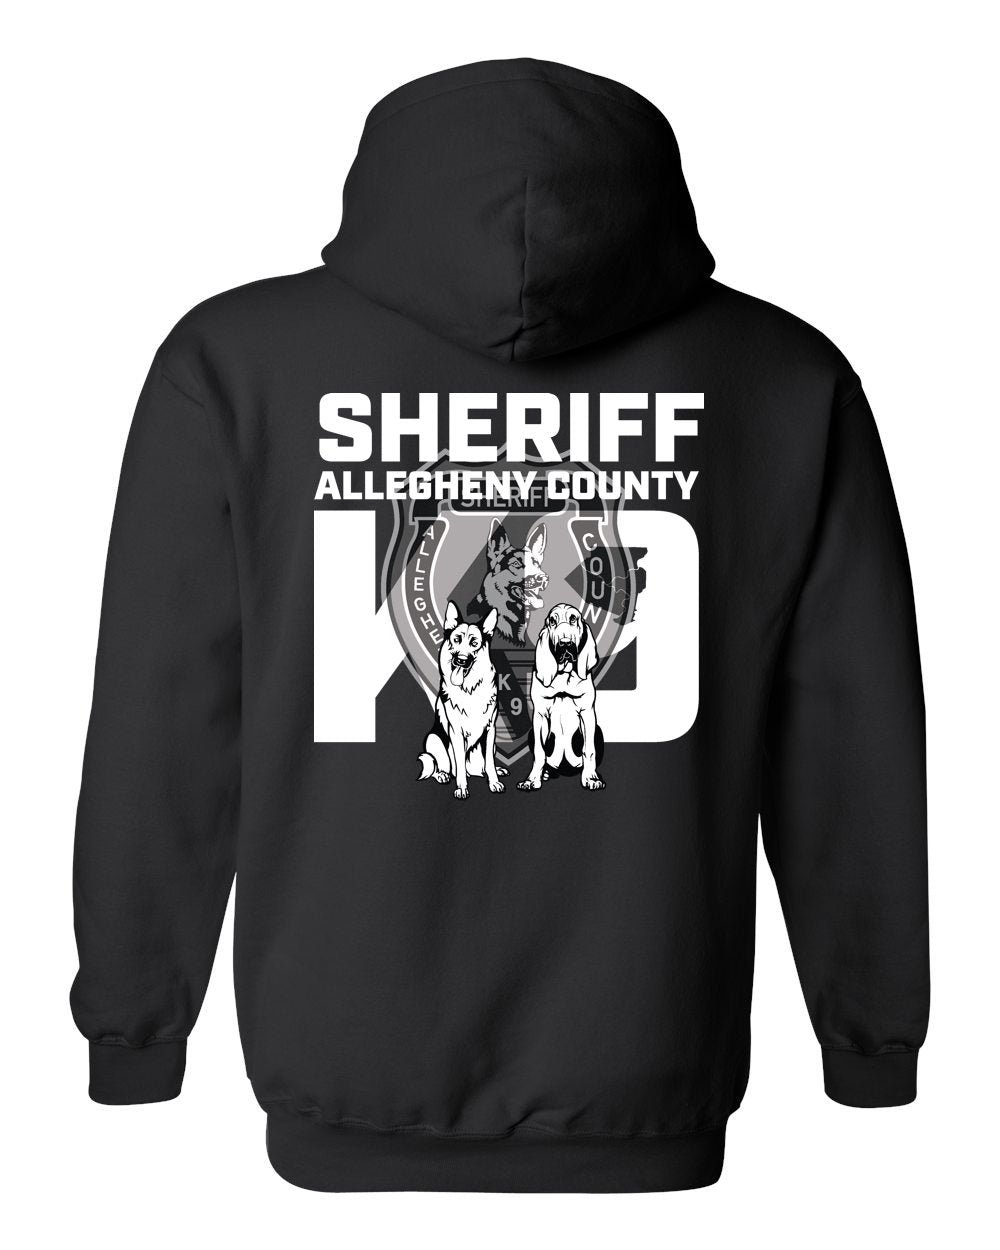 Allegheny County Sheriff's K9 Unit Cotton Hoodie